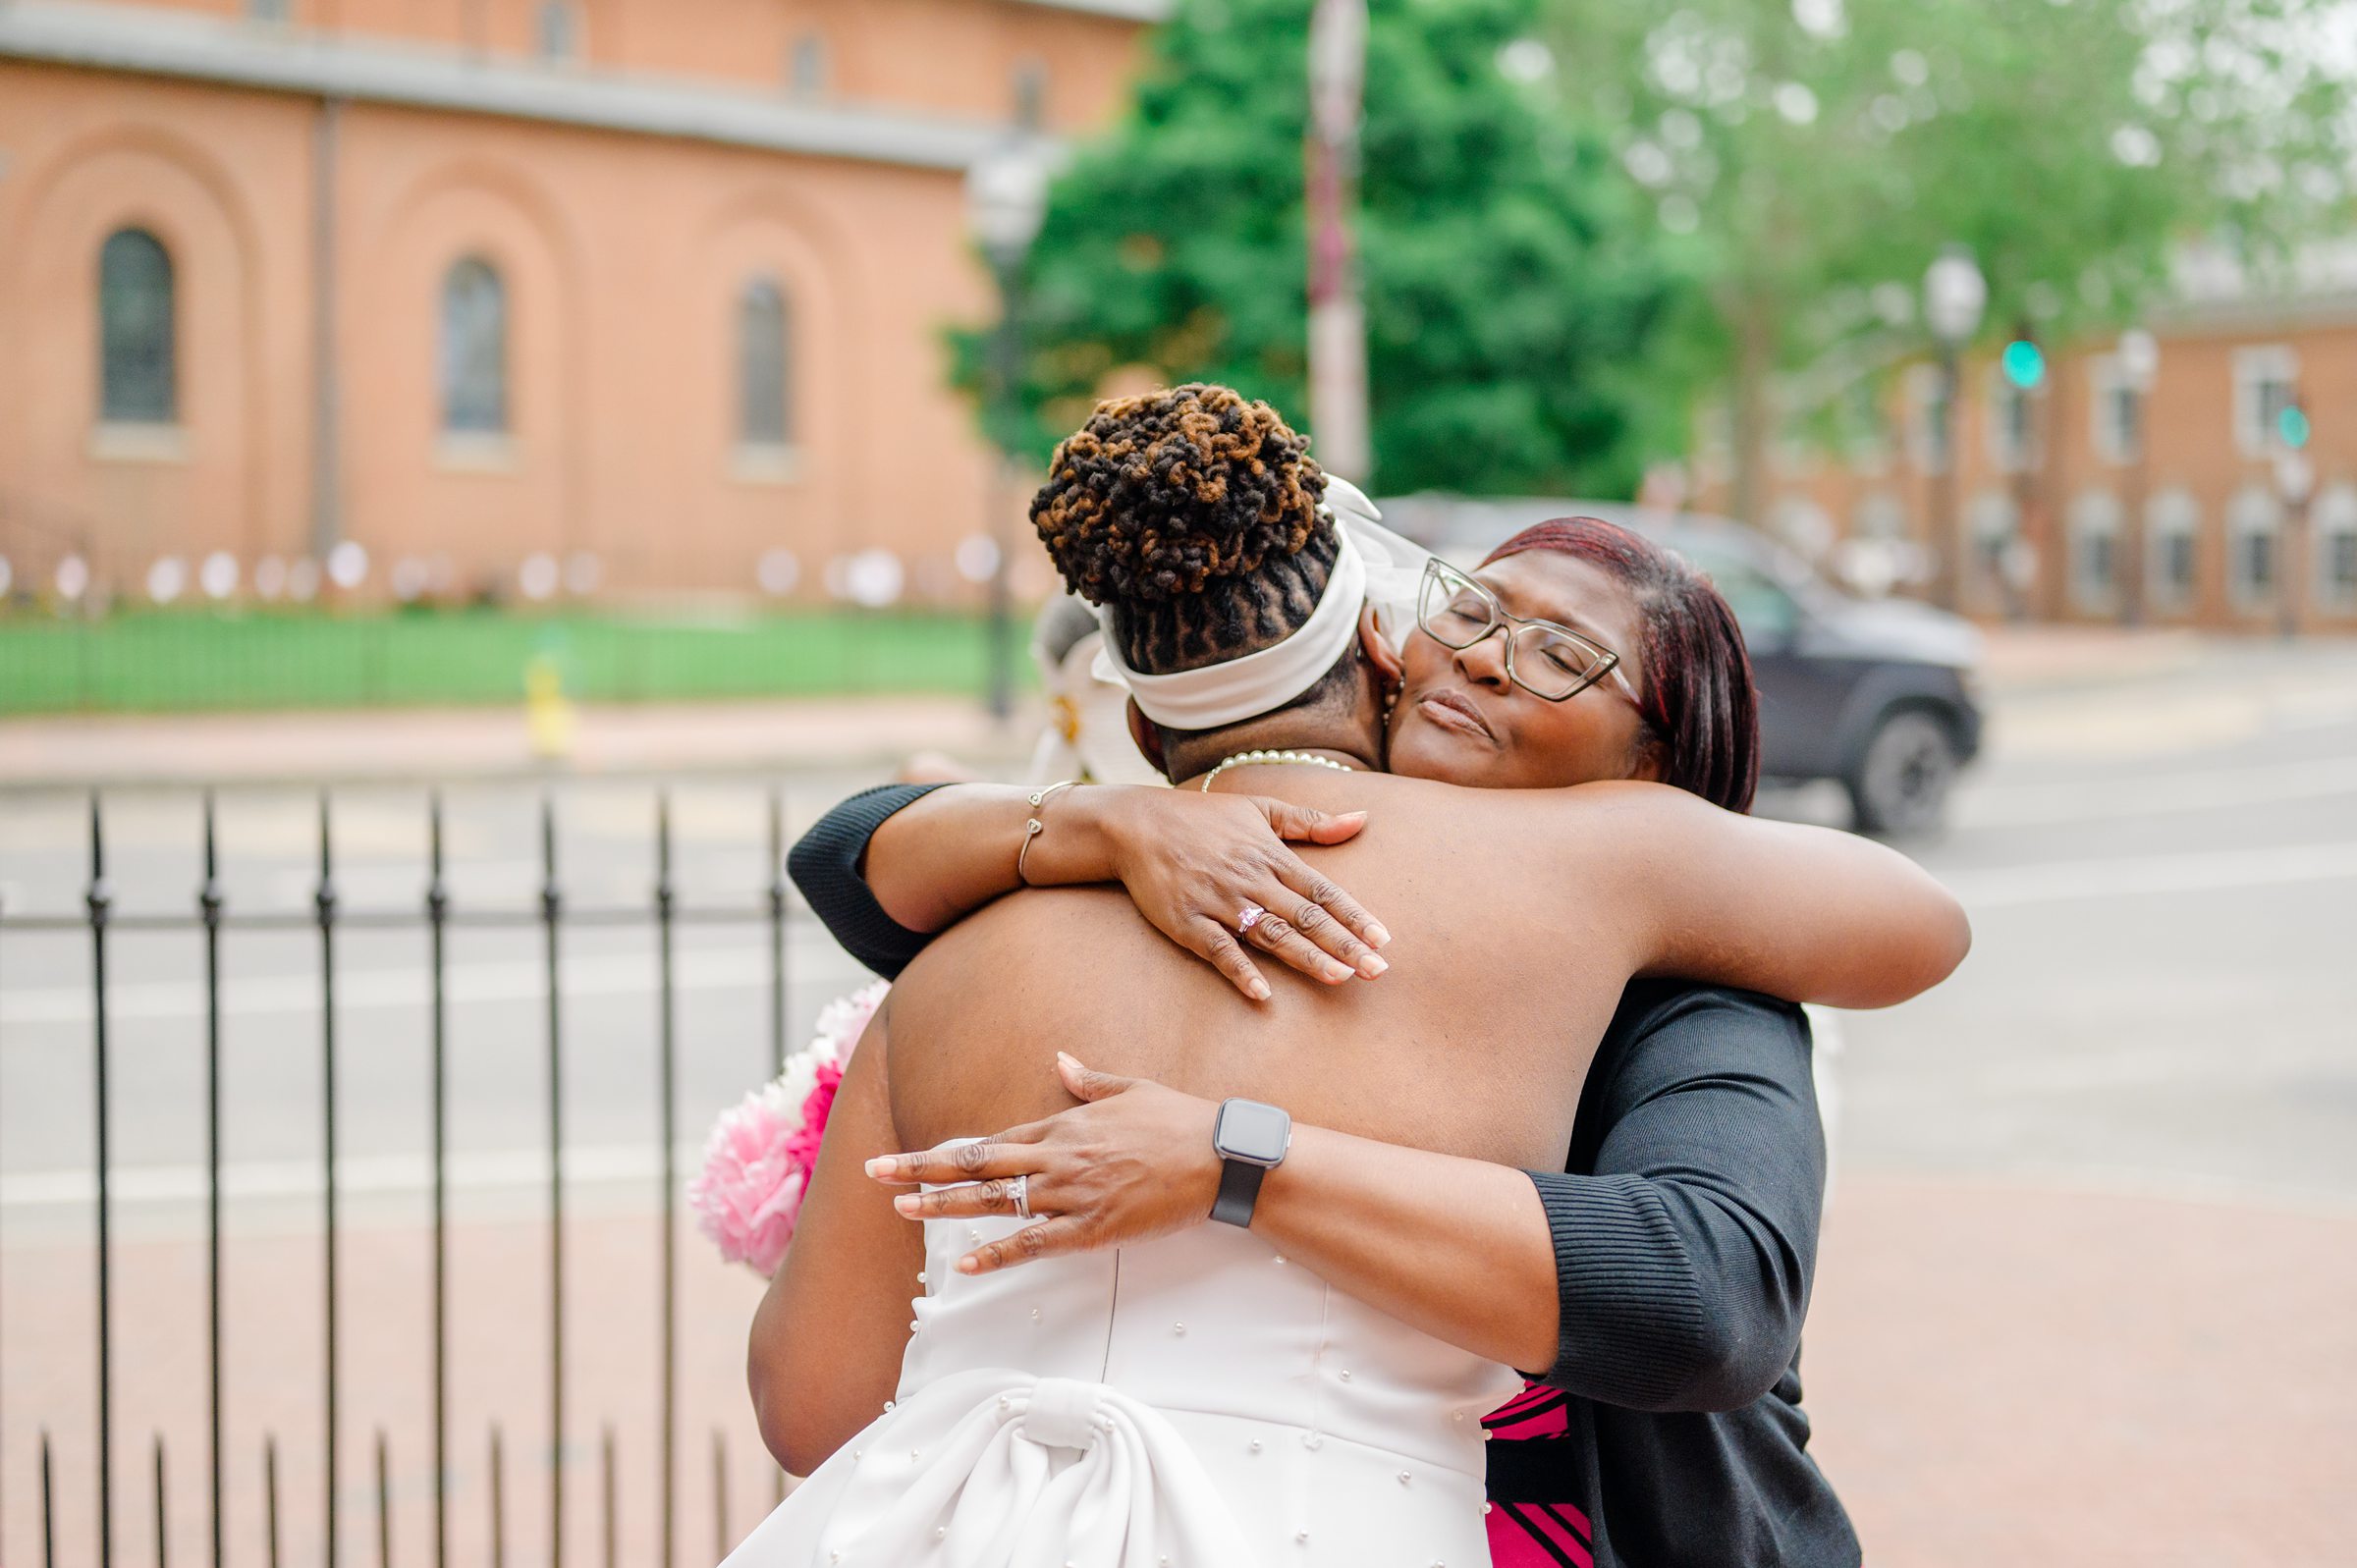 Intimate elopement in the historic Annapolis, Maryland photographed by Baltimore Wedding Photographer Cait Kramer.